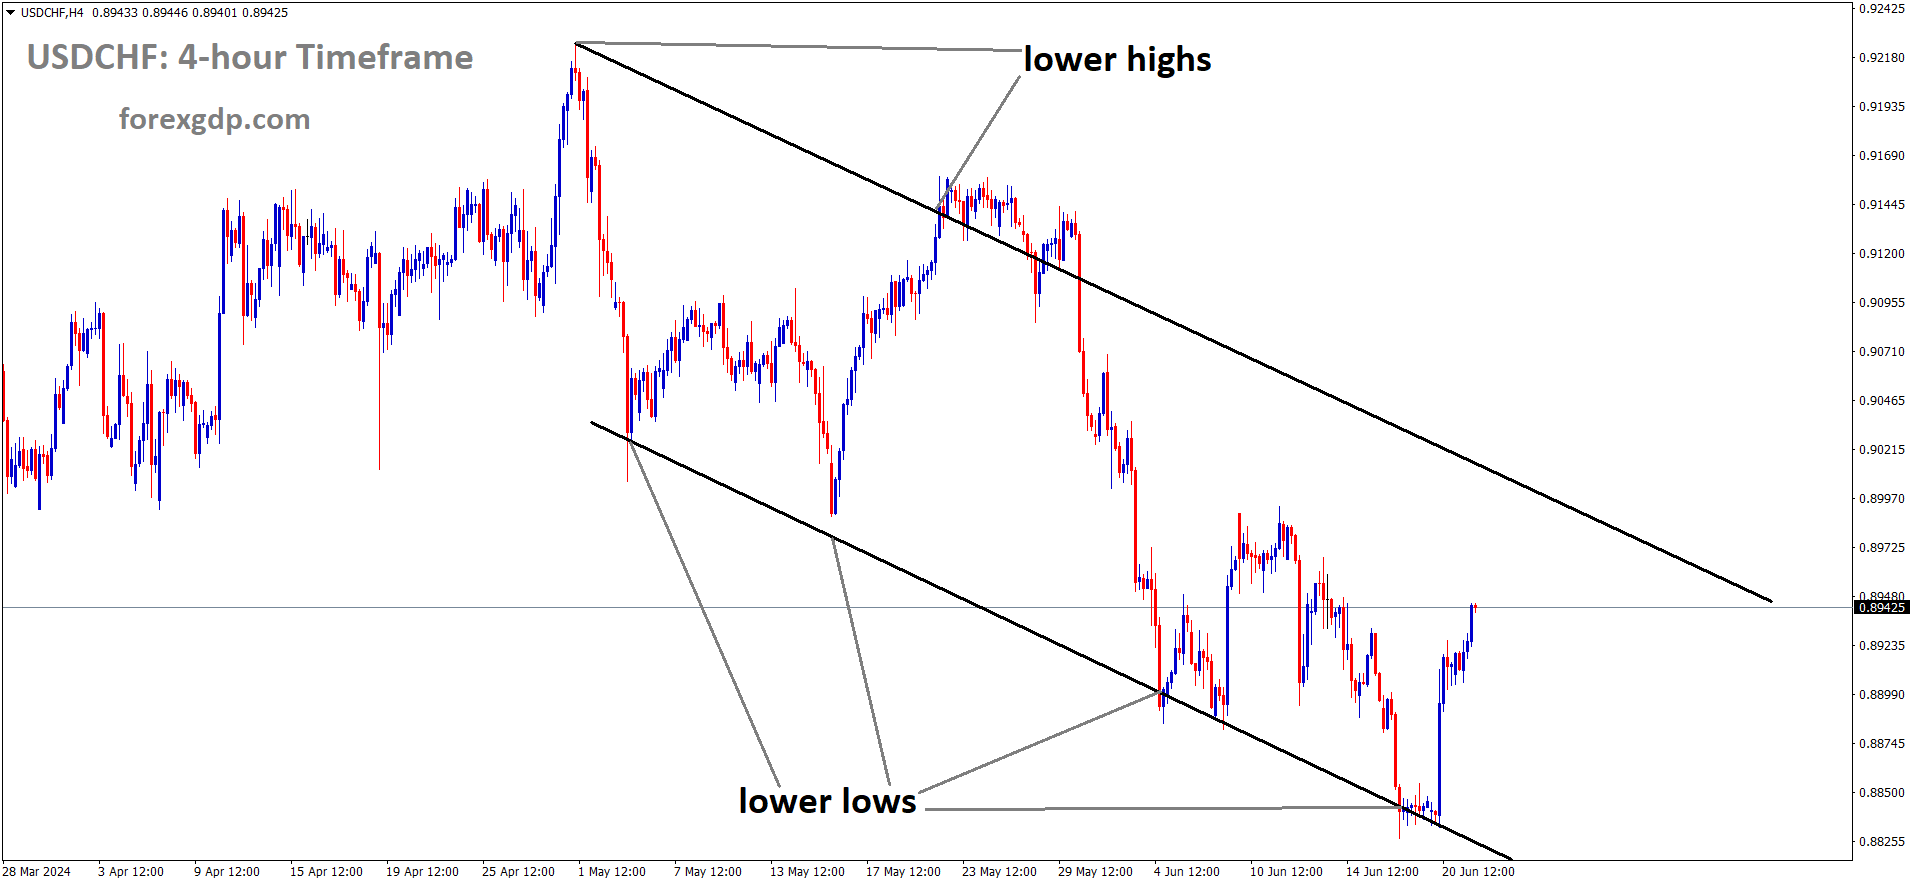 USDCHF is moving in Descending channel and market has rebounded from the lower low area of the channel